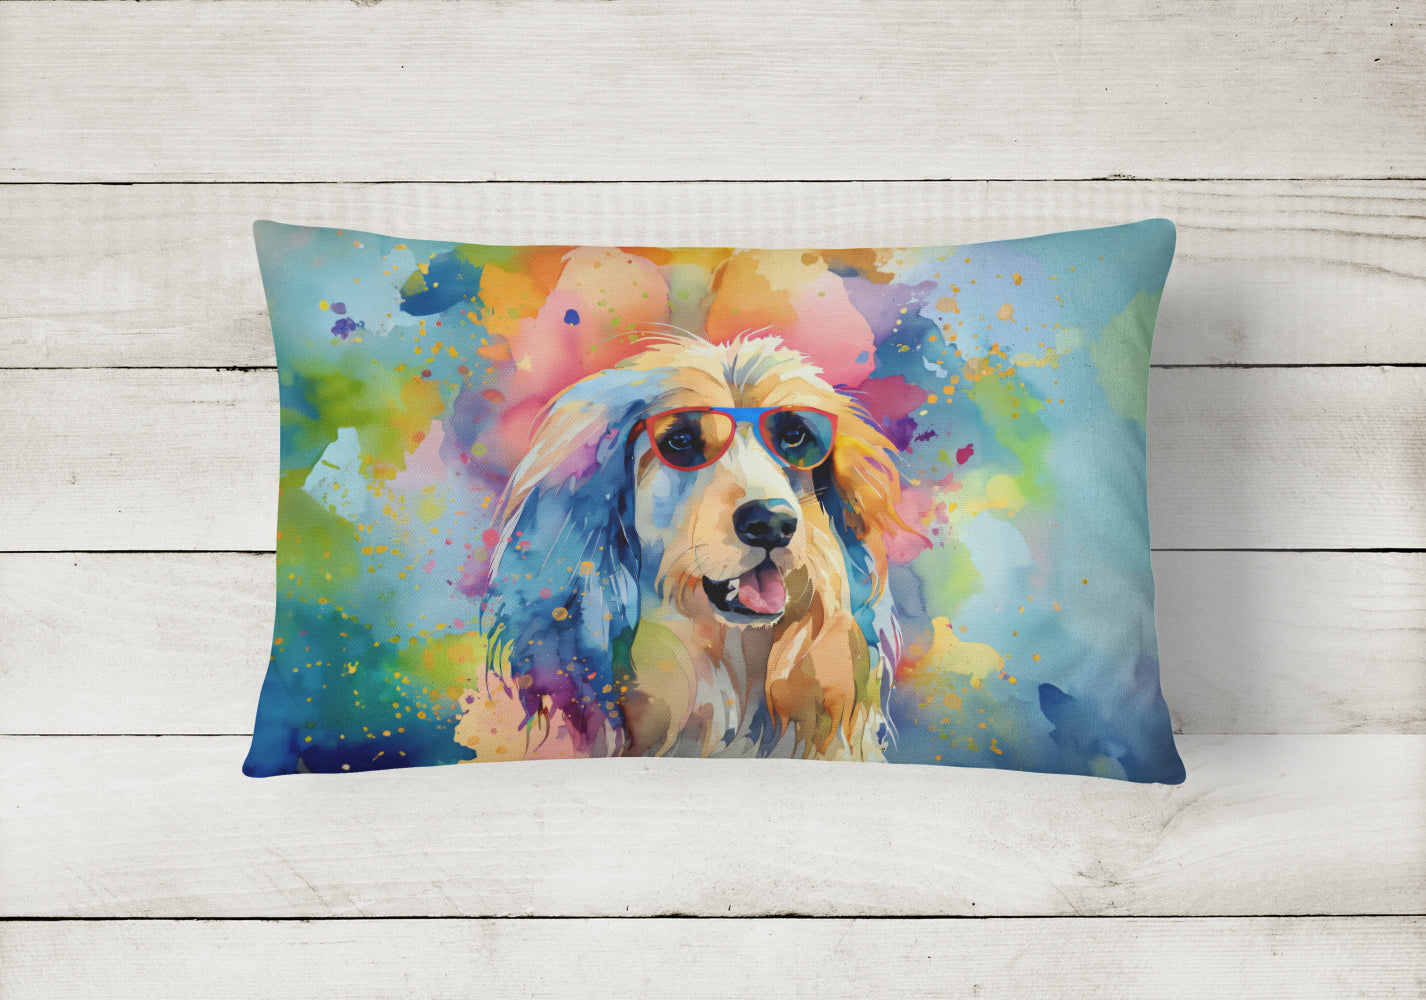 Buy this Afghan Hound Hippie Dawg Fabric Decorative Pillow